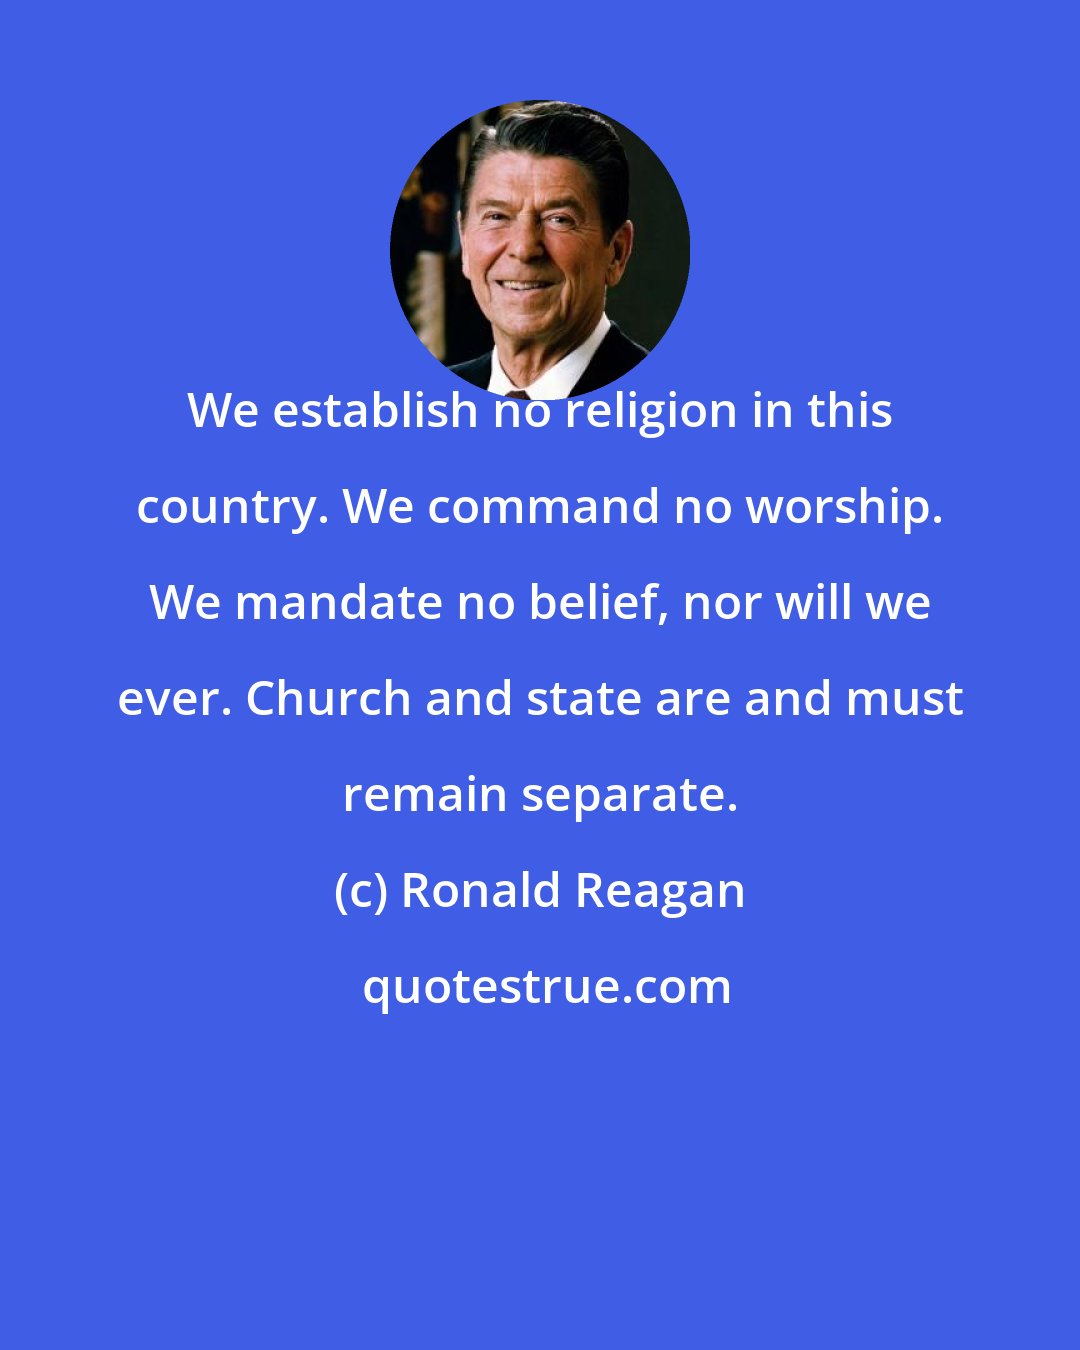 Ronald Reagan: We establish no religion in this country. We command no worship. We mandate no belief, nor will we ever. Church and state are and must remain separate.